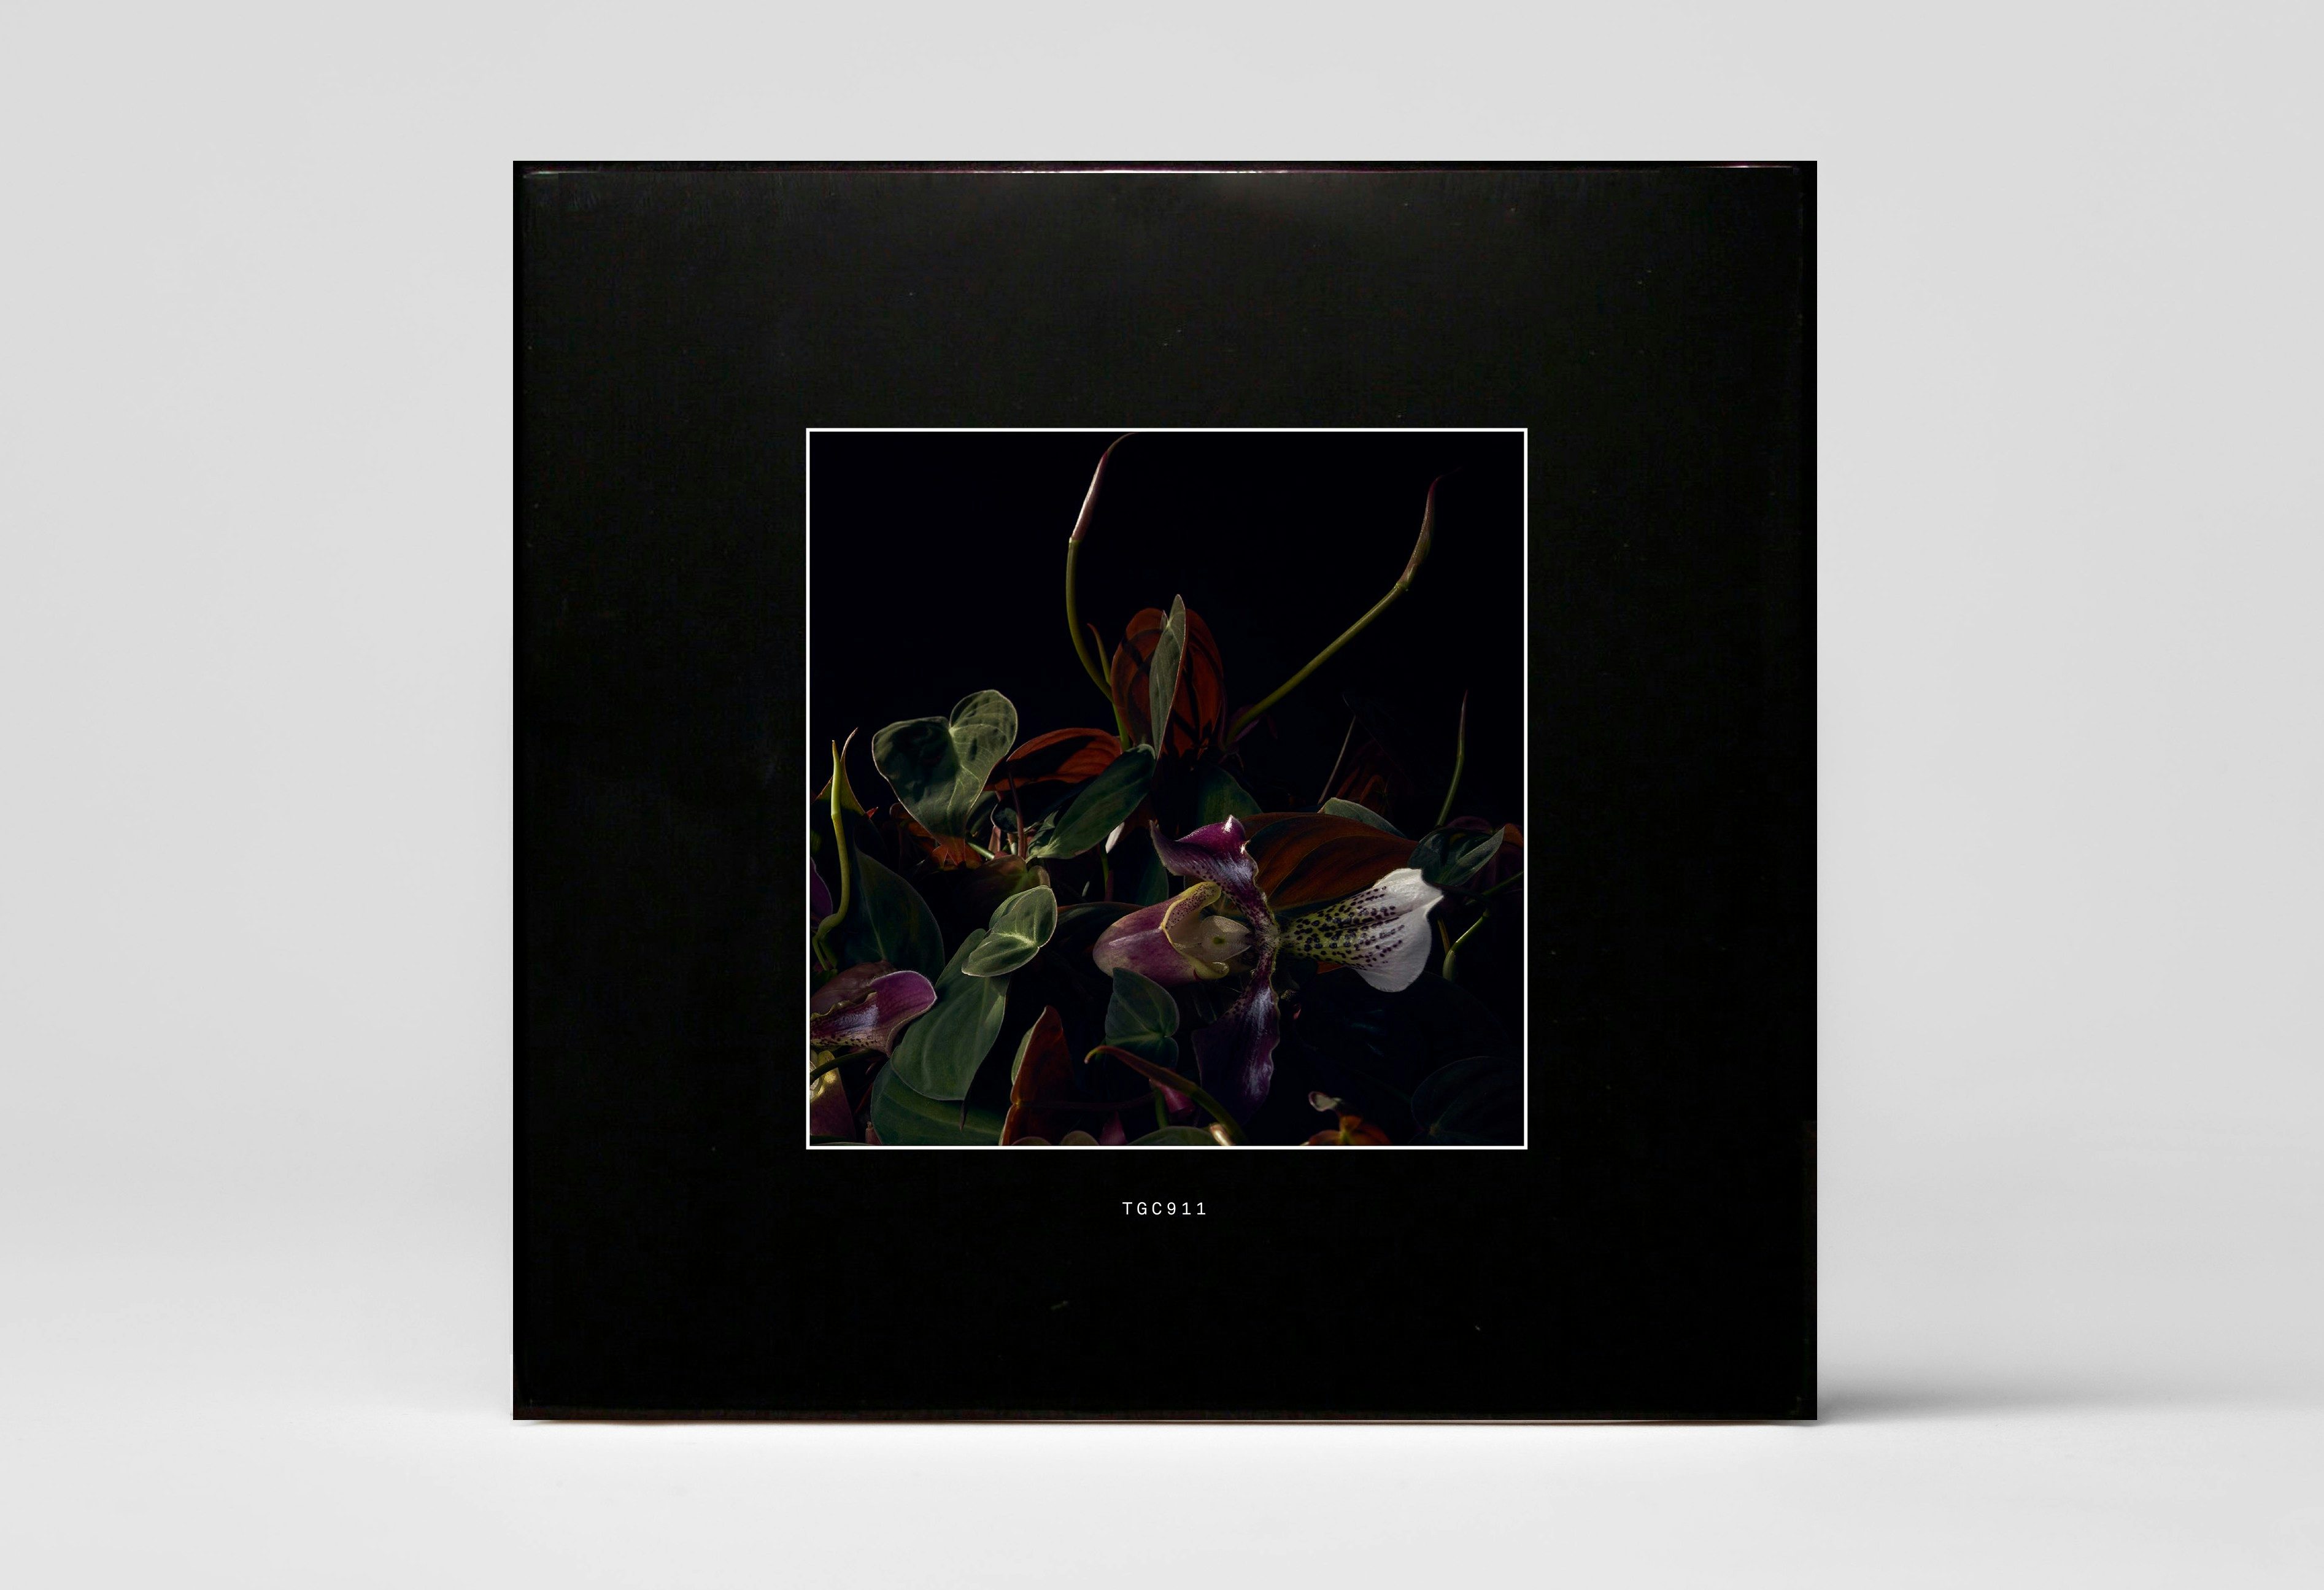 A black album cover with a photo of a floral arrangement in the center